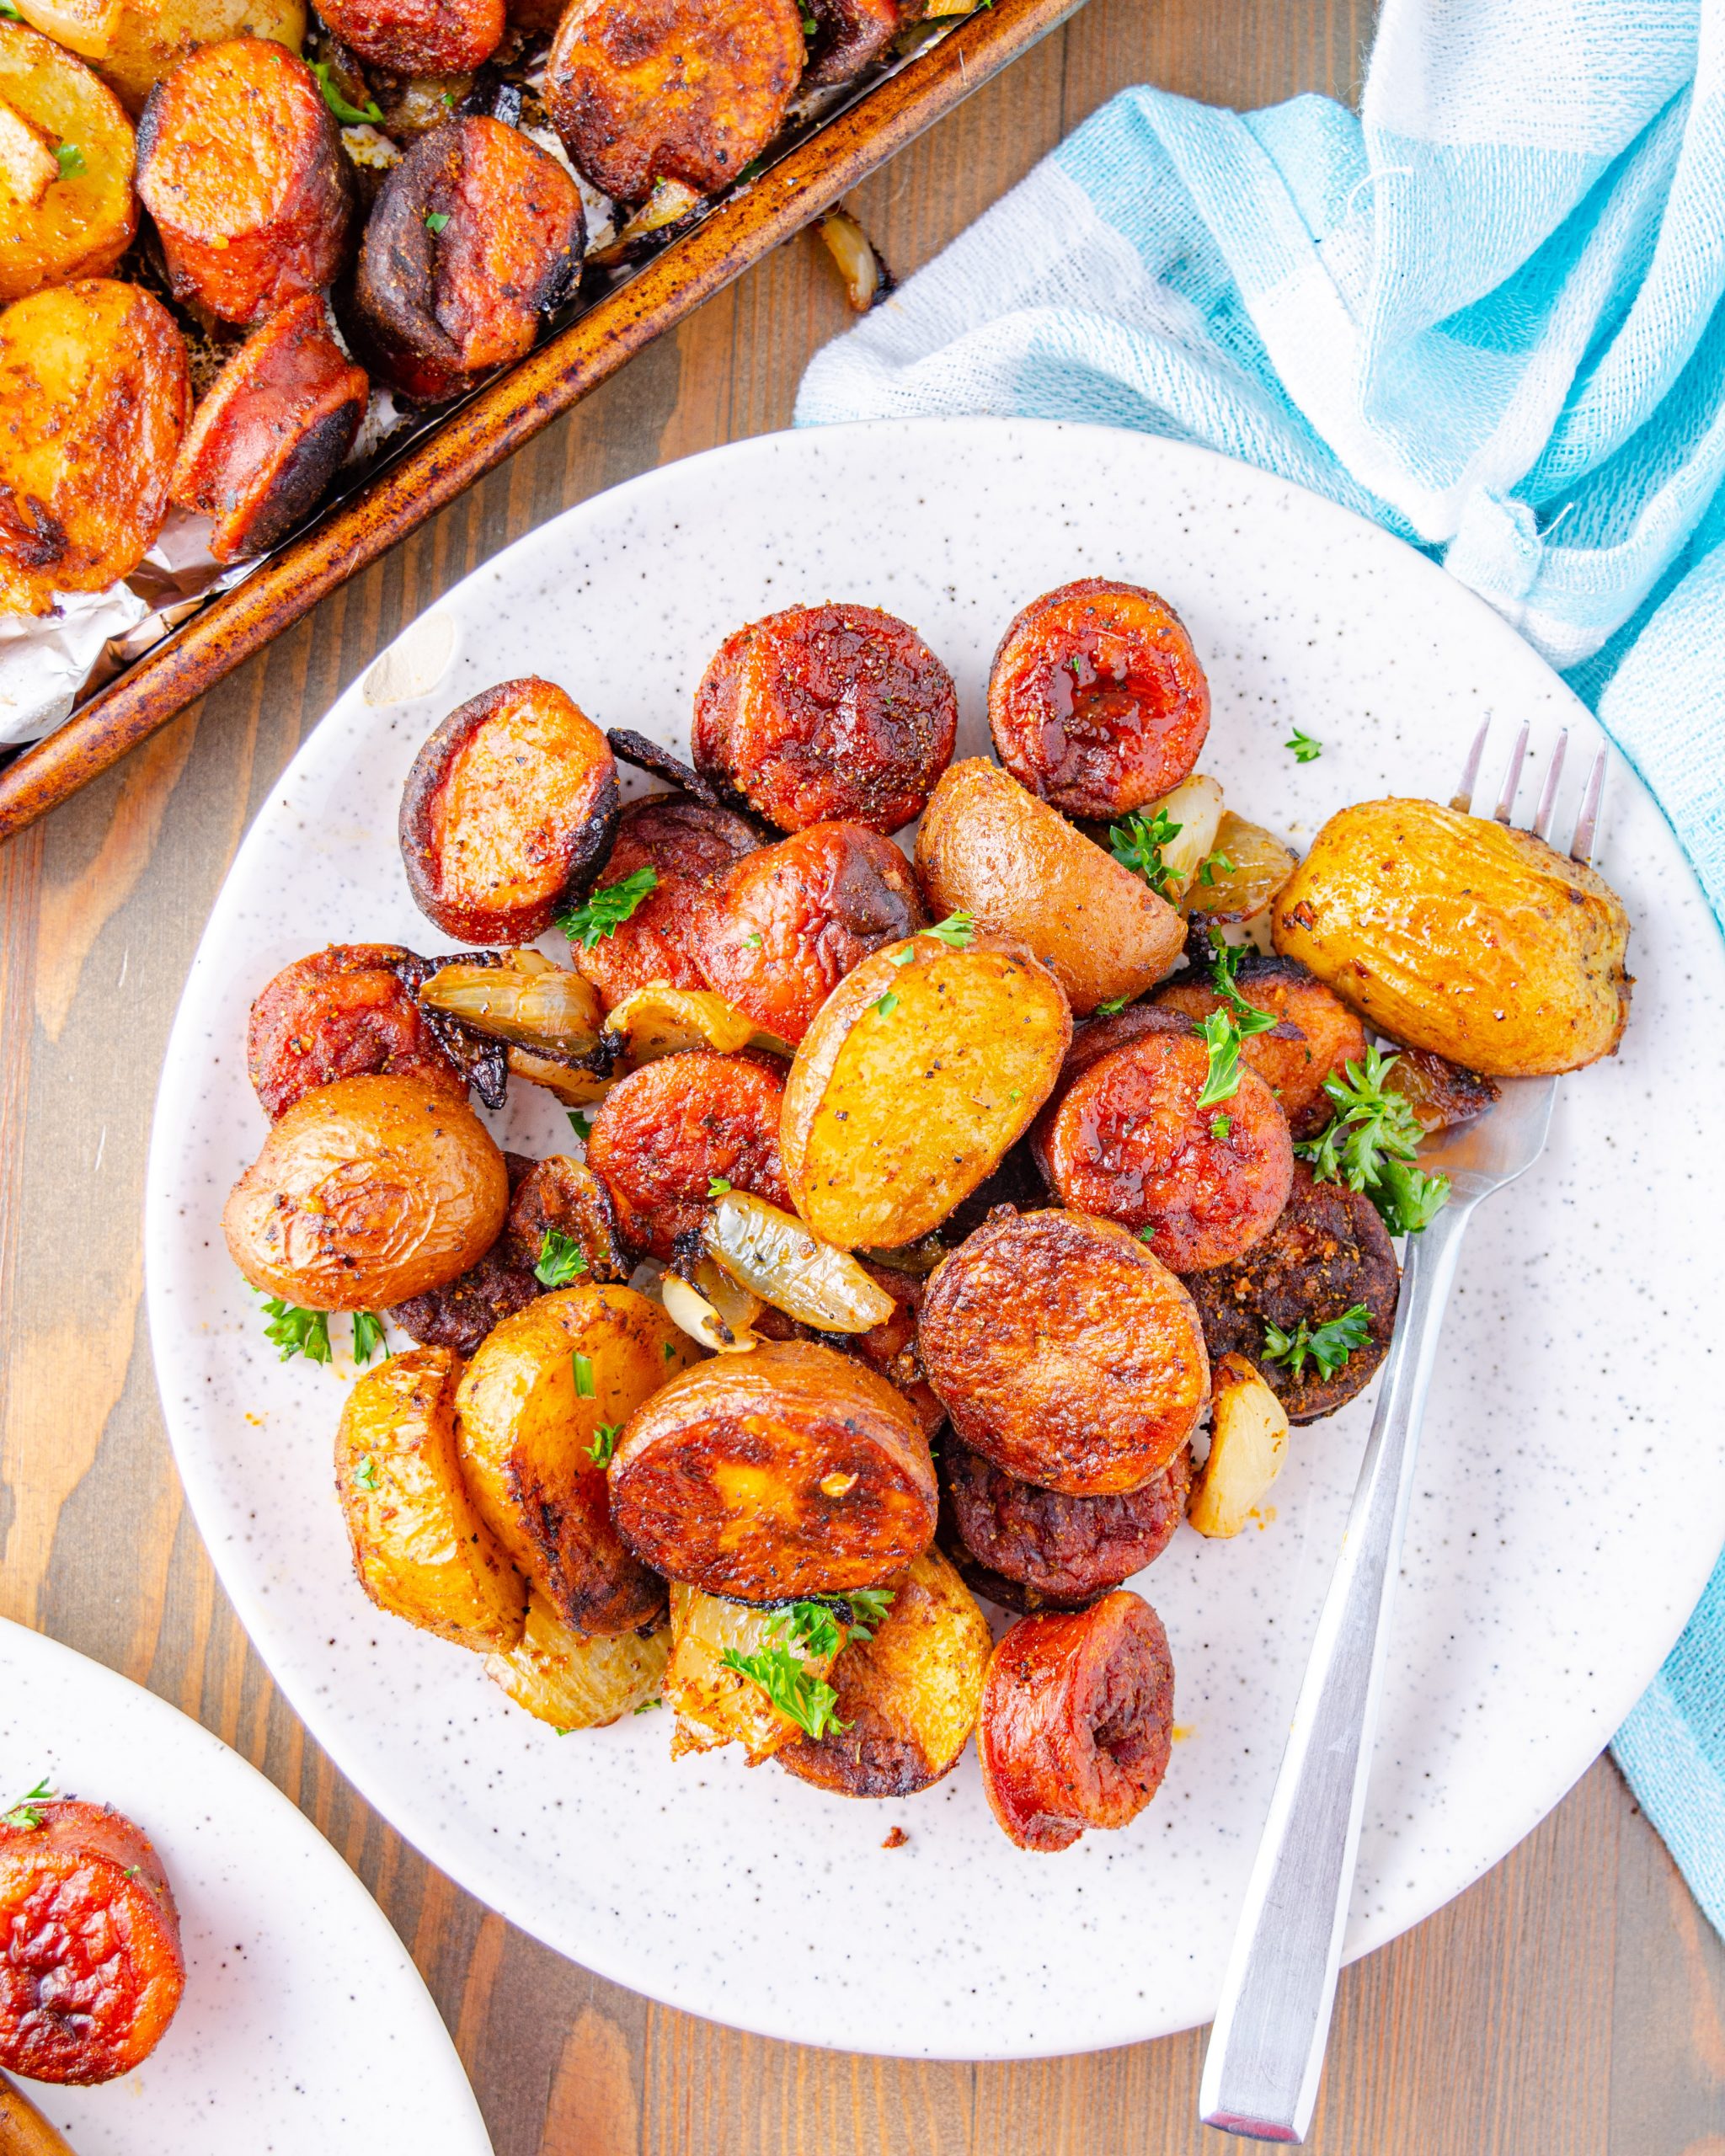 baked sausage and potatoes, Oven Roasted Sausage and Potatoes, Sausage and Potato Bake